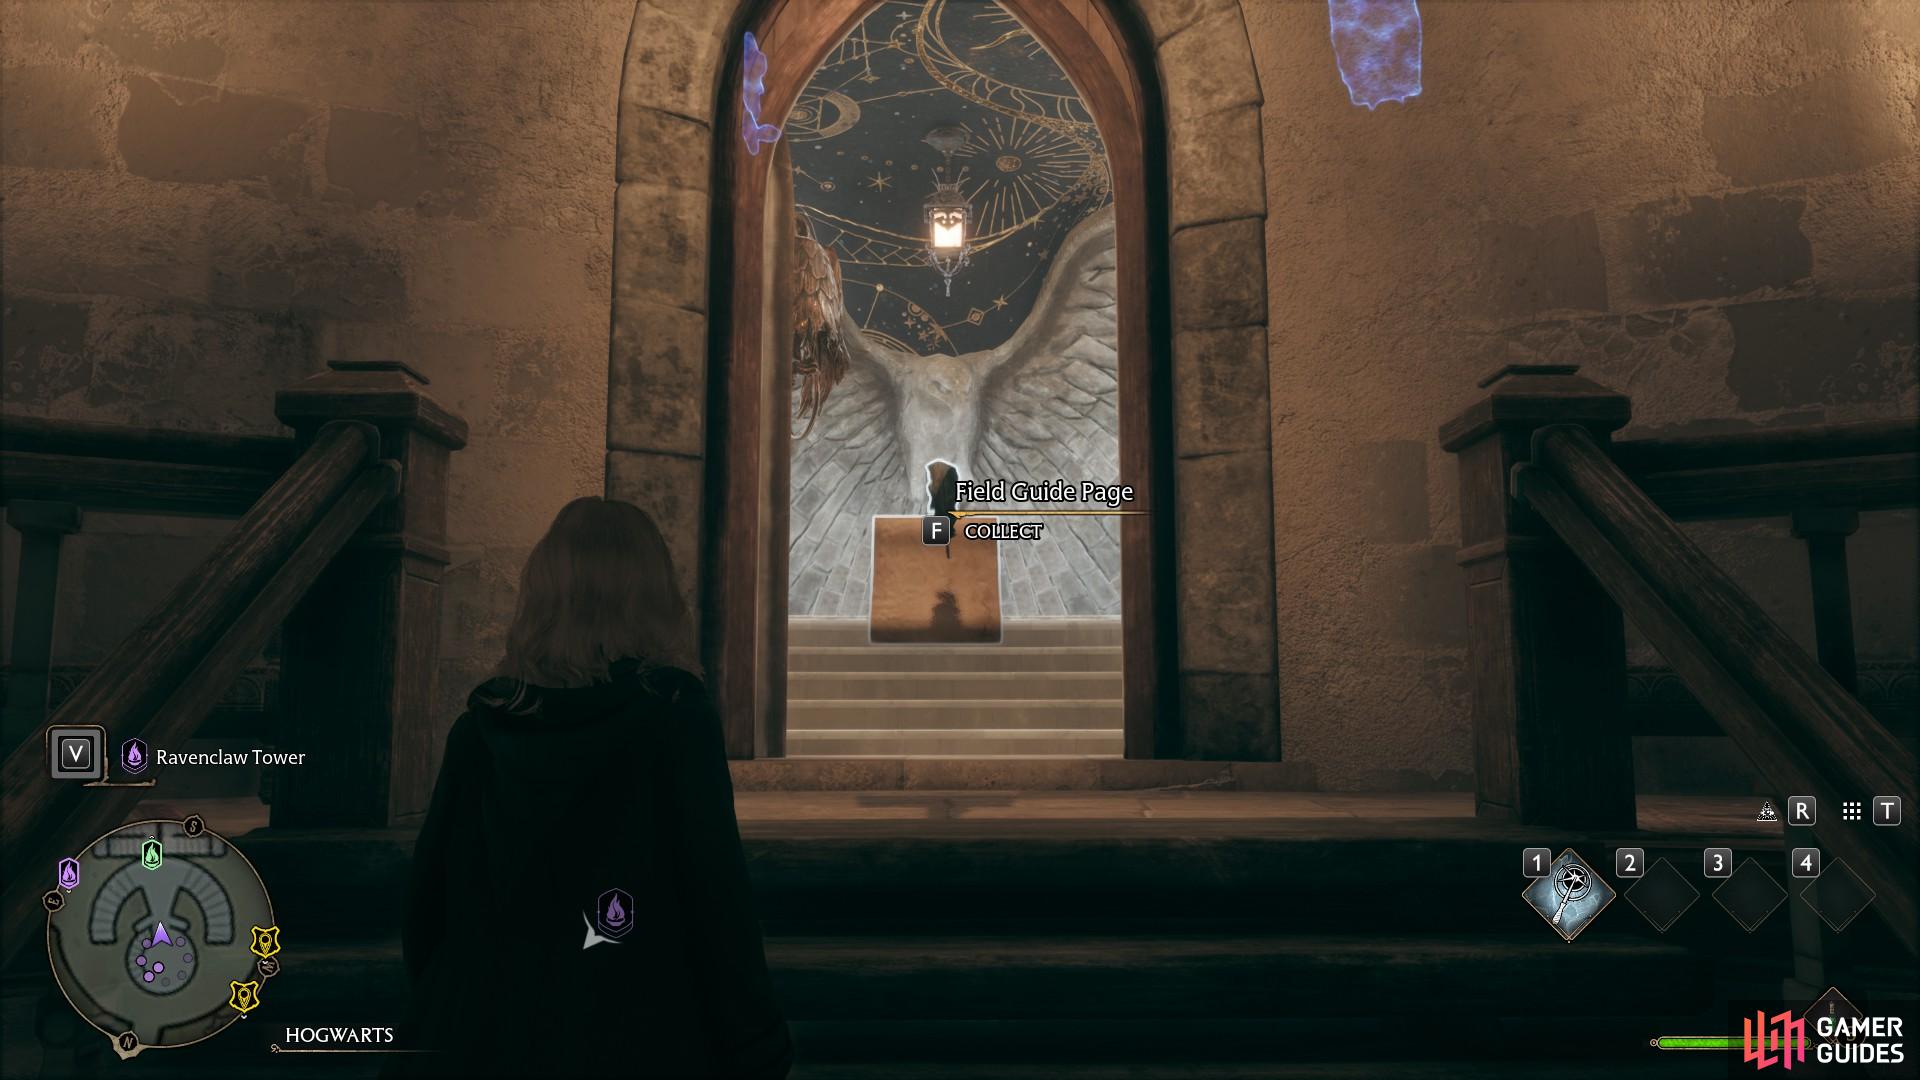 The Ravencal Doorknocker Page is right at the entrance to the common room, at the top of the spire.